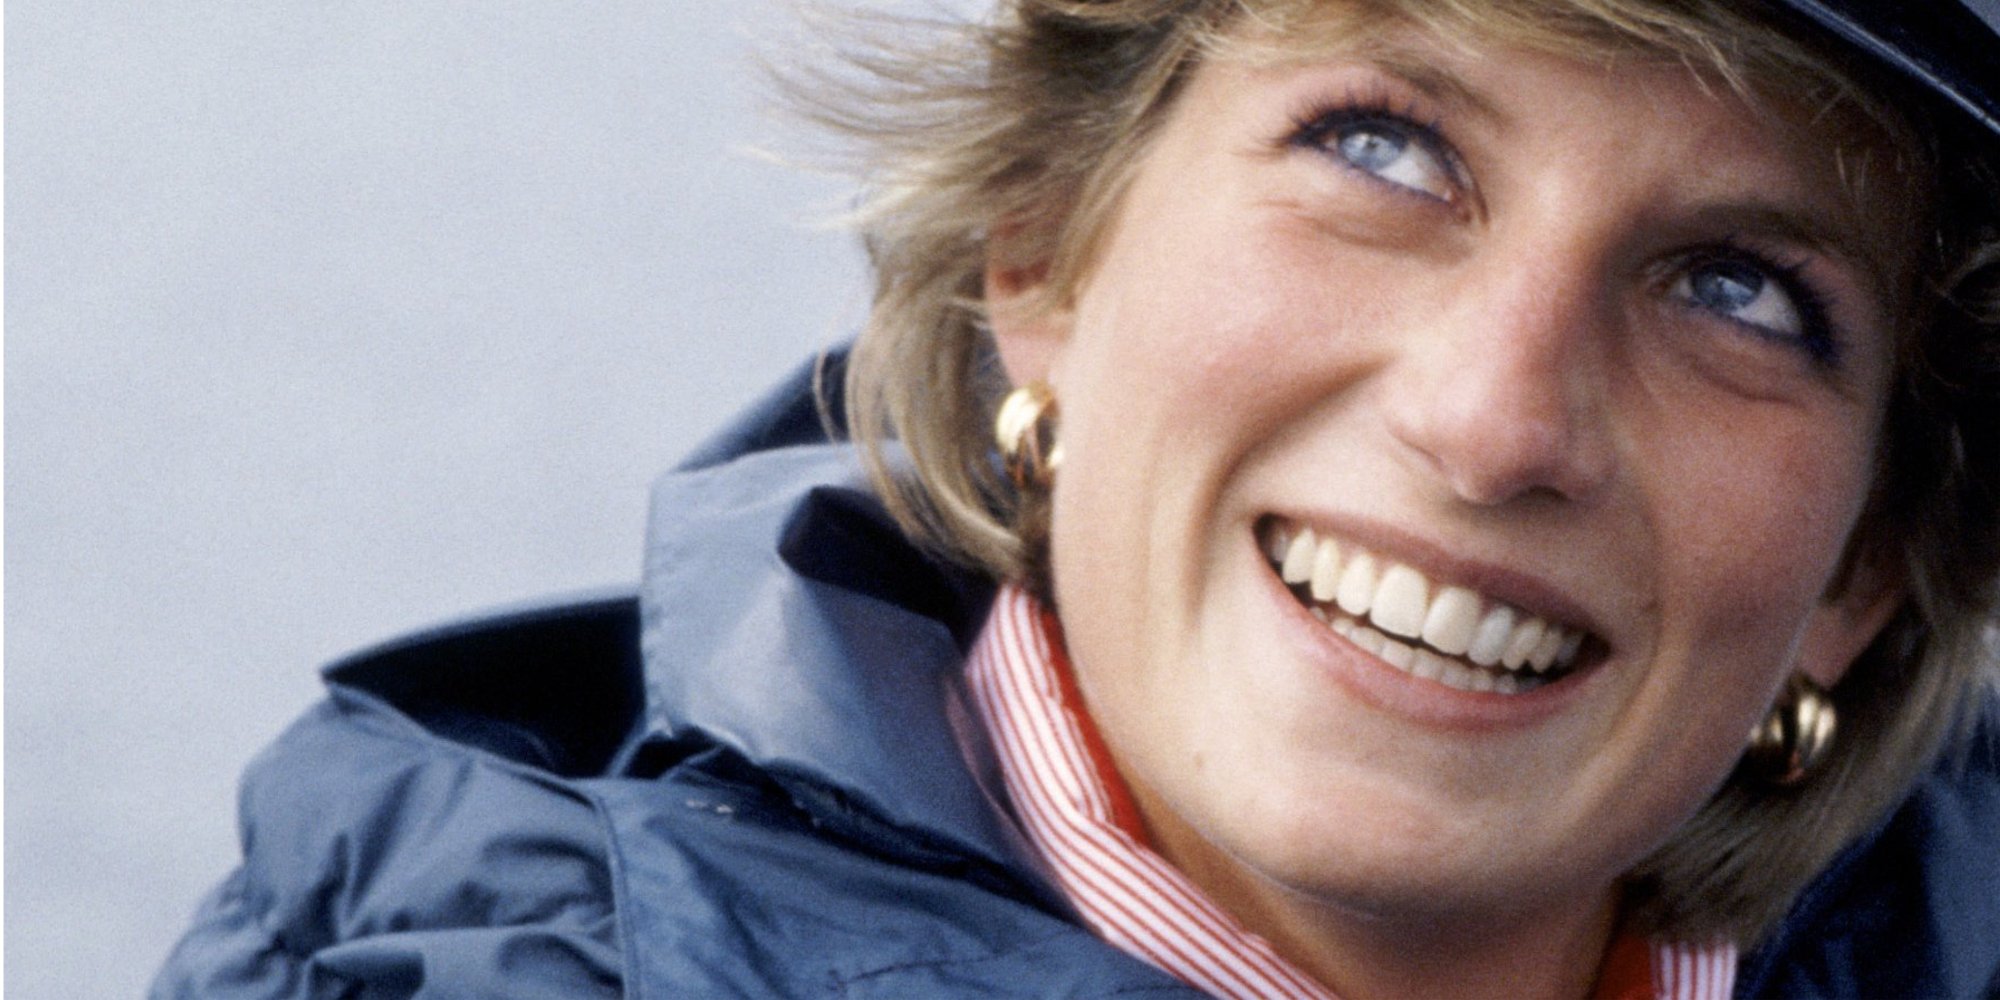 Princess Diana smiles wearing a naval hat in an archival photograph.